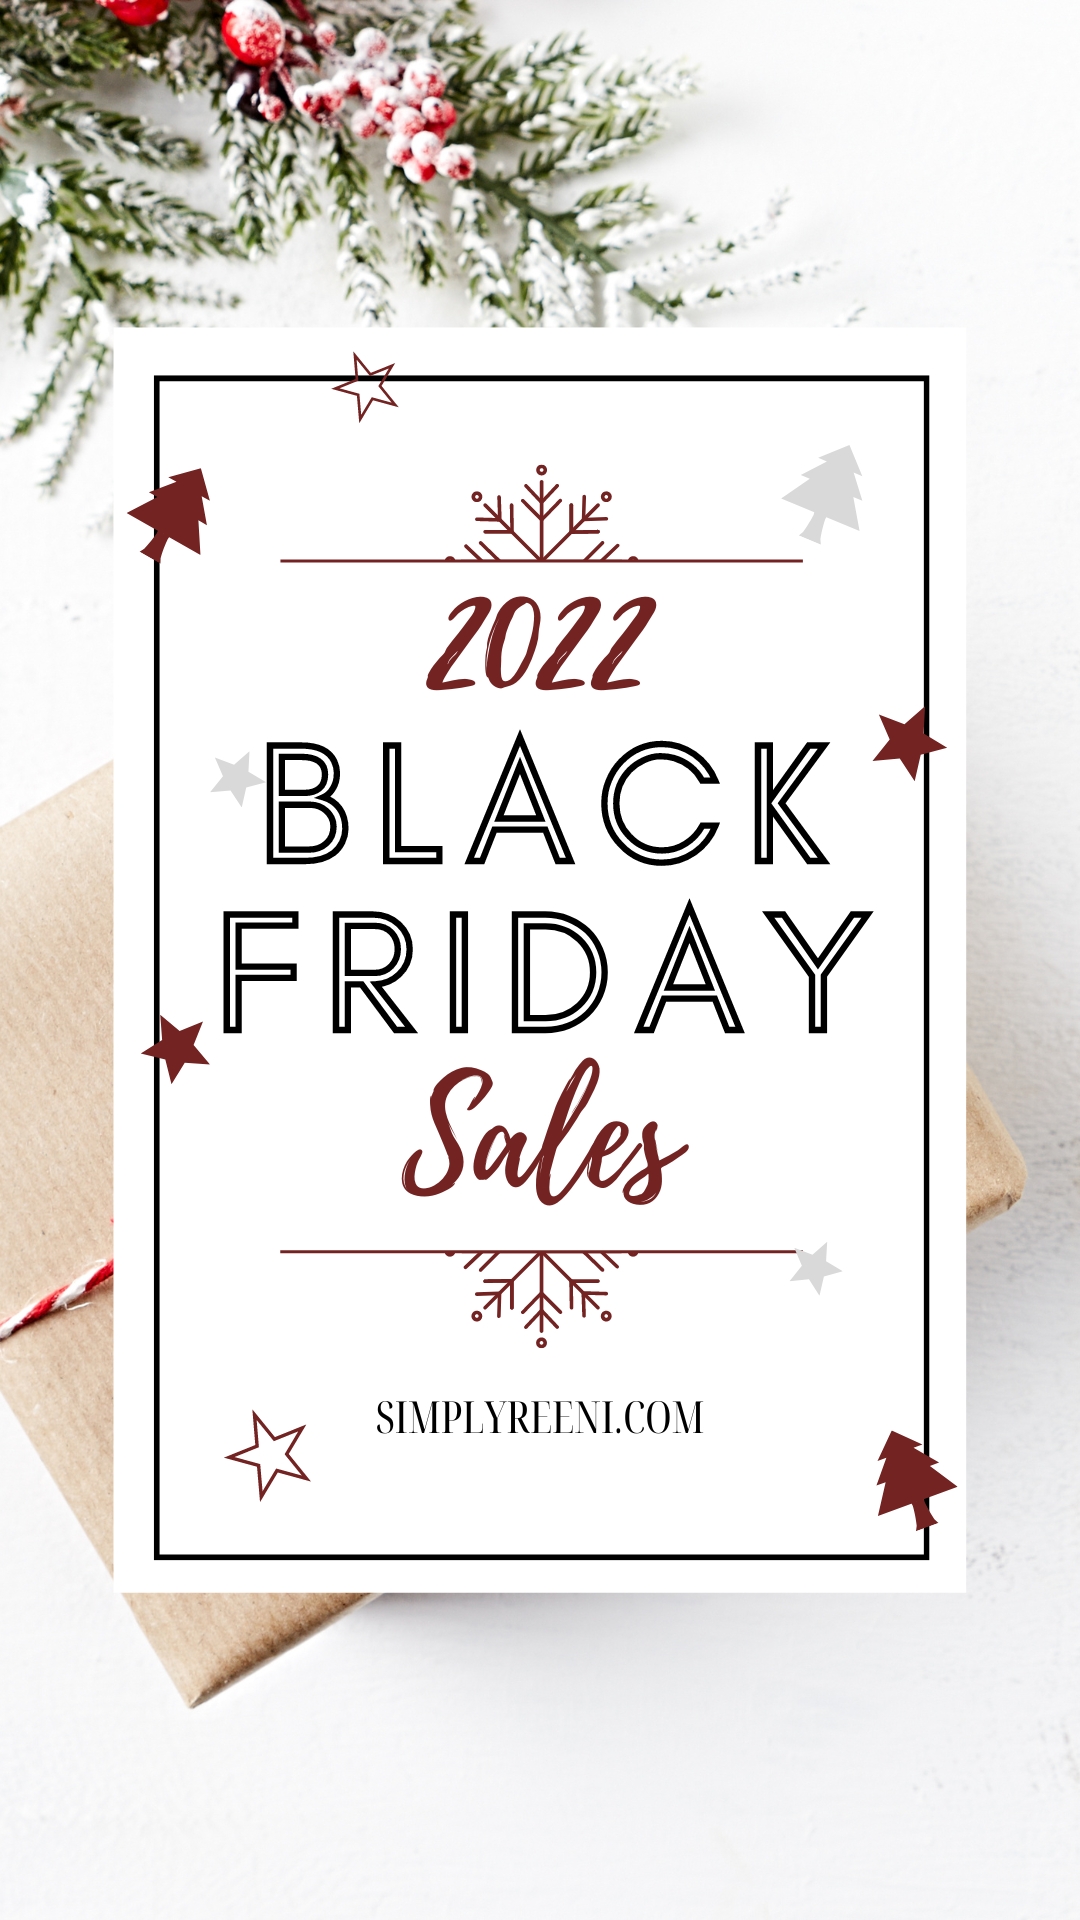 Best Black Friday Sales and Deals